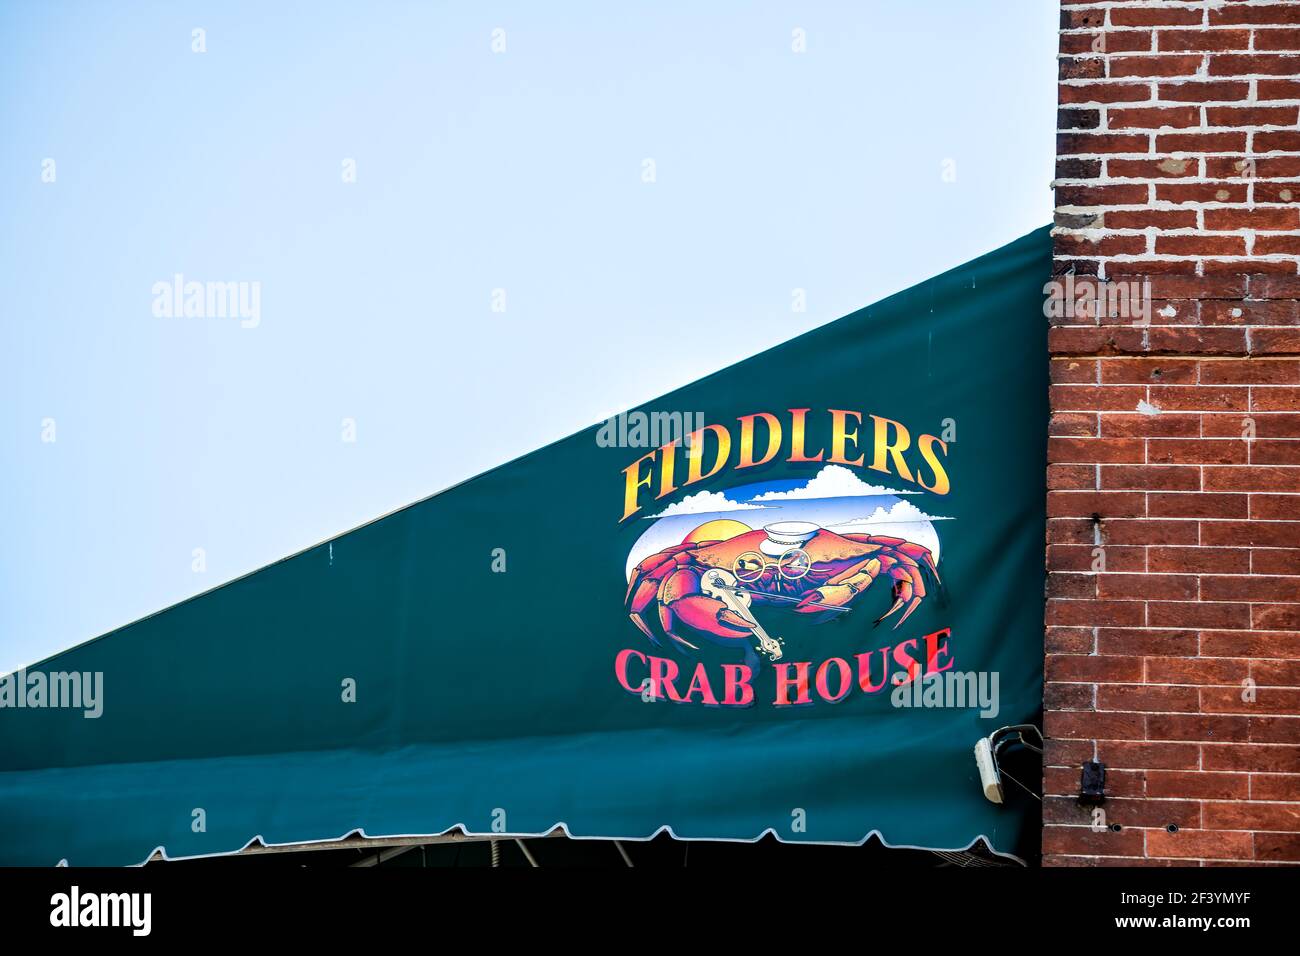 Savannah, USA - 11. Mai 2018: Old Town River Street in Georgia Southern Old Town City mit Fiddlers' Crab House Seafood Restaurant Schild Stockfoto